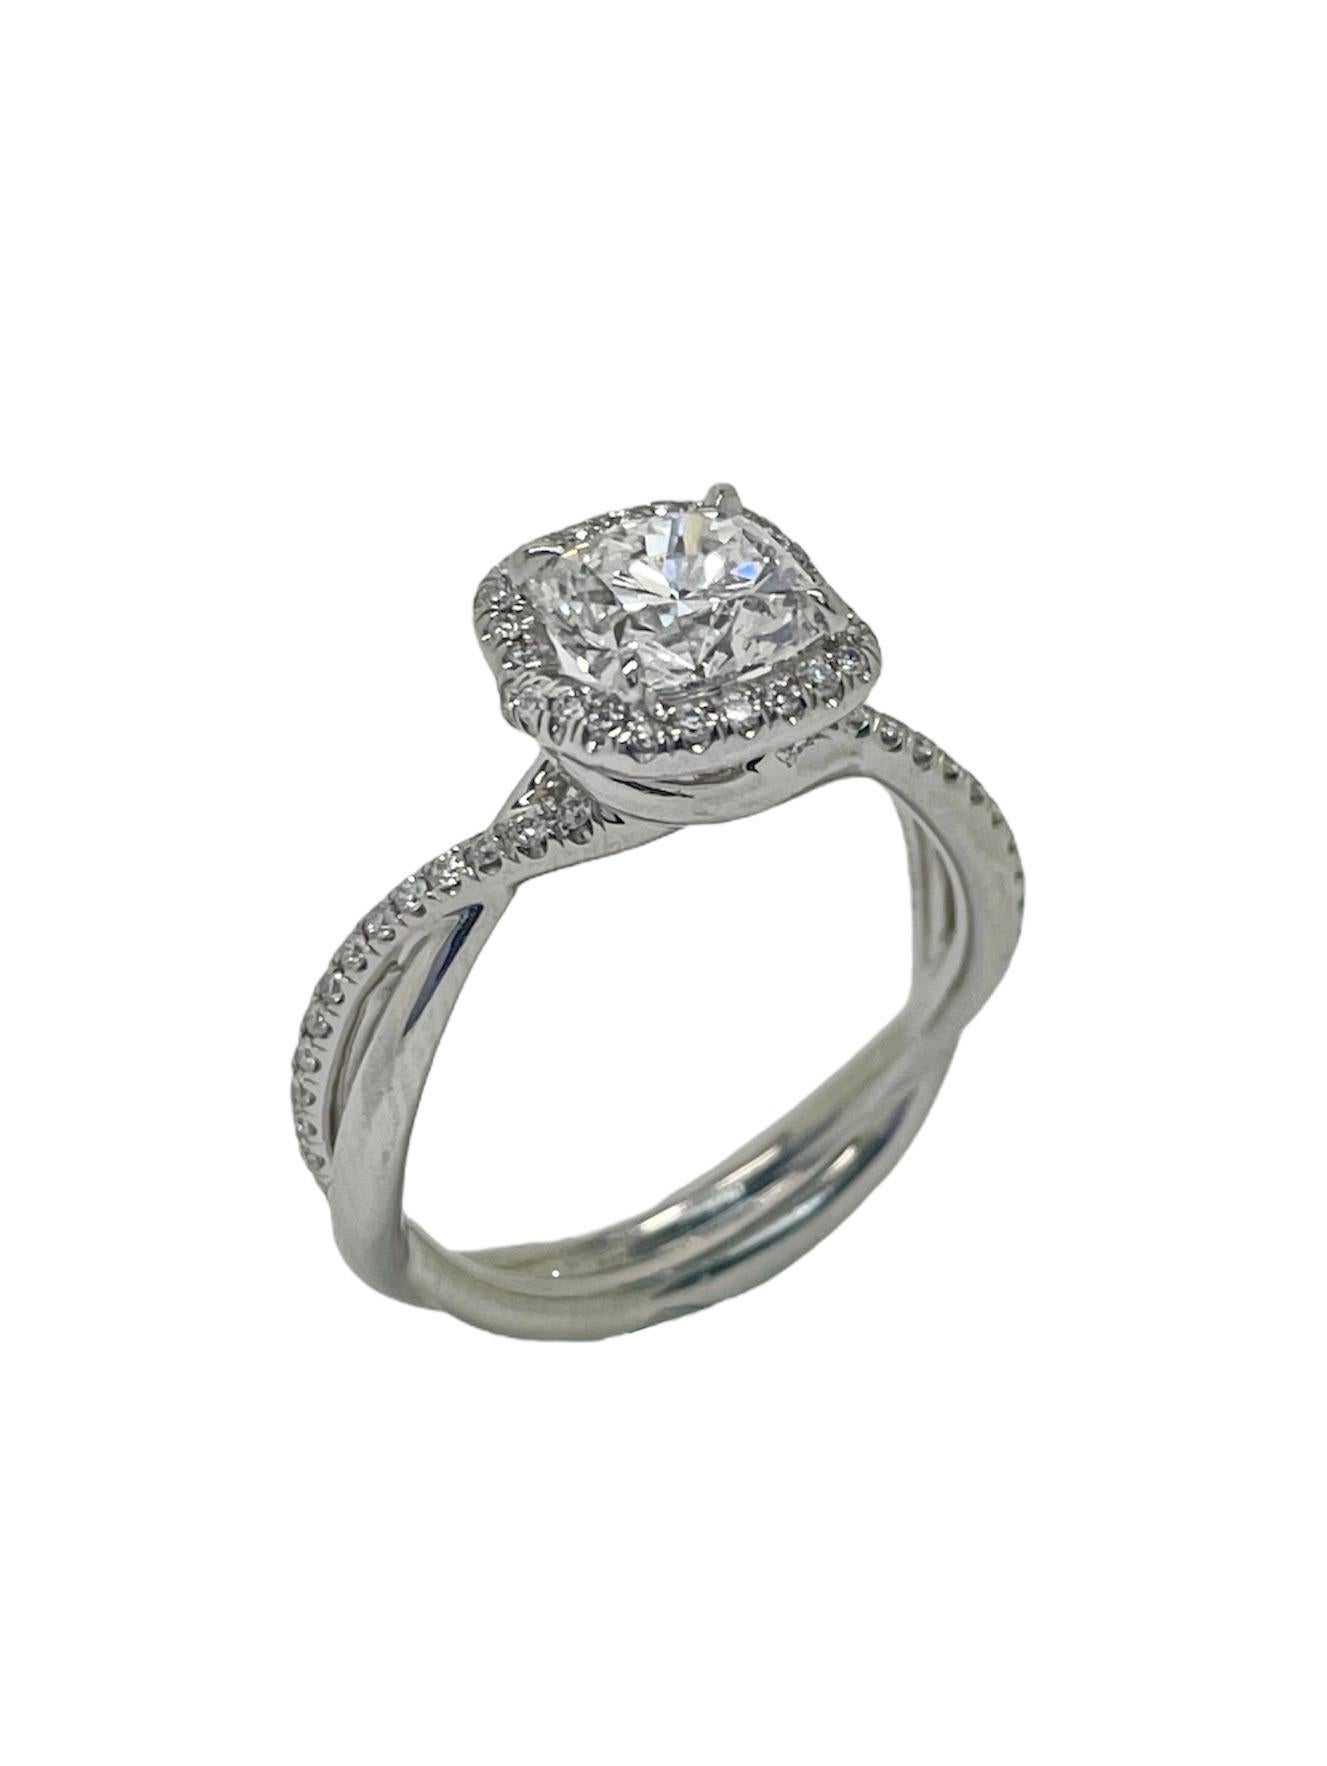 This elegant engagement ring contains a 1.22 carat cushion brilliant cut diamond, E color and SI1 clarity, this diamond is a stunner! The band, in a twisted infinity design symbolizing two lives coming together, with pave round brilliant cut